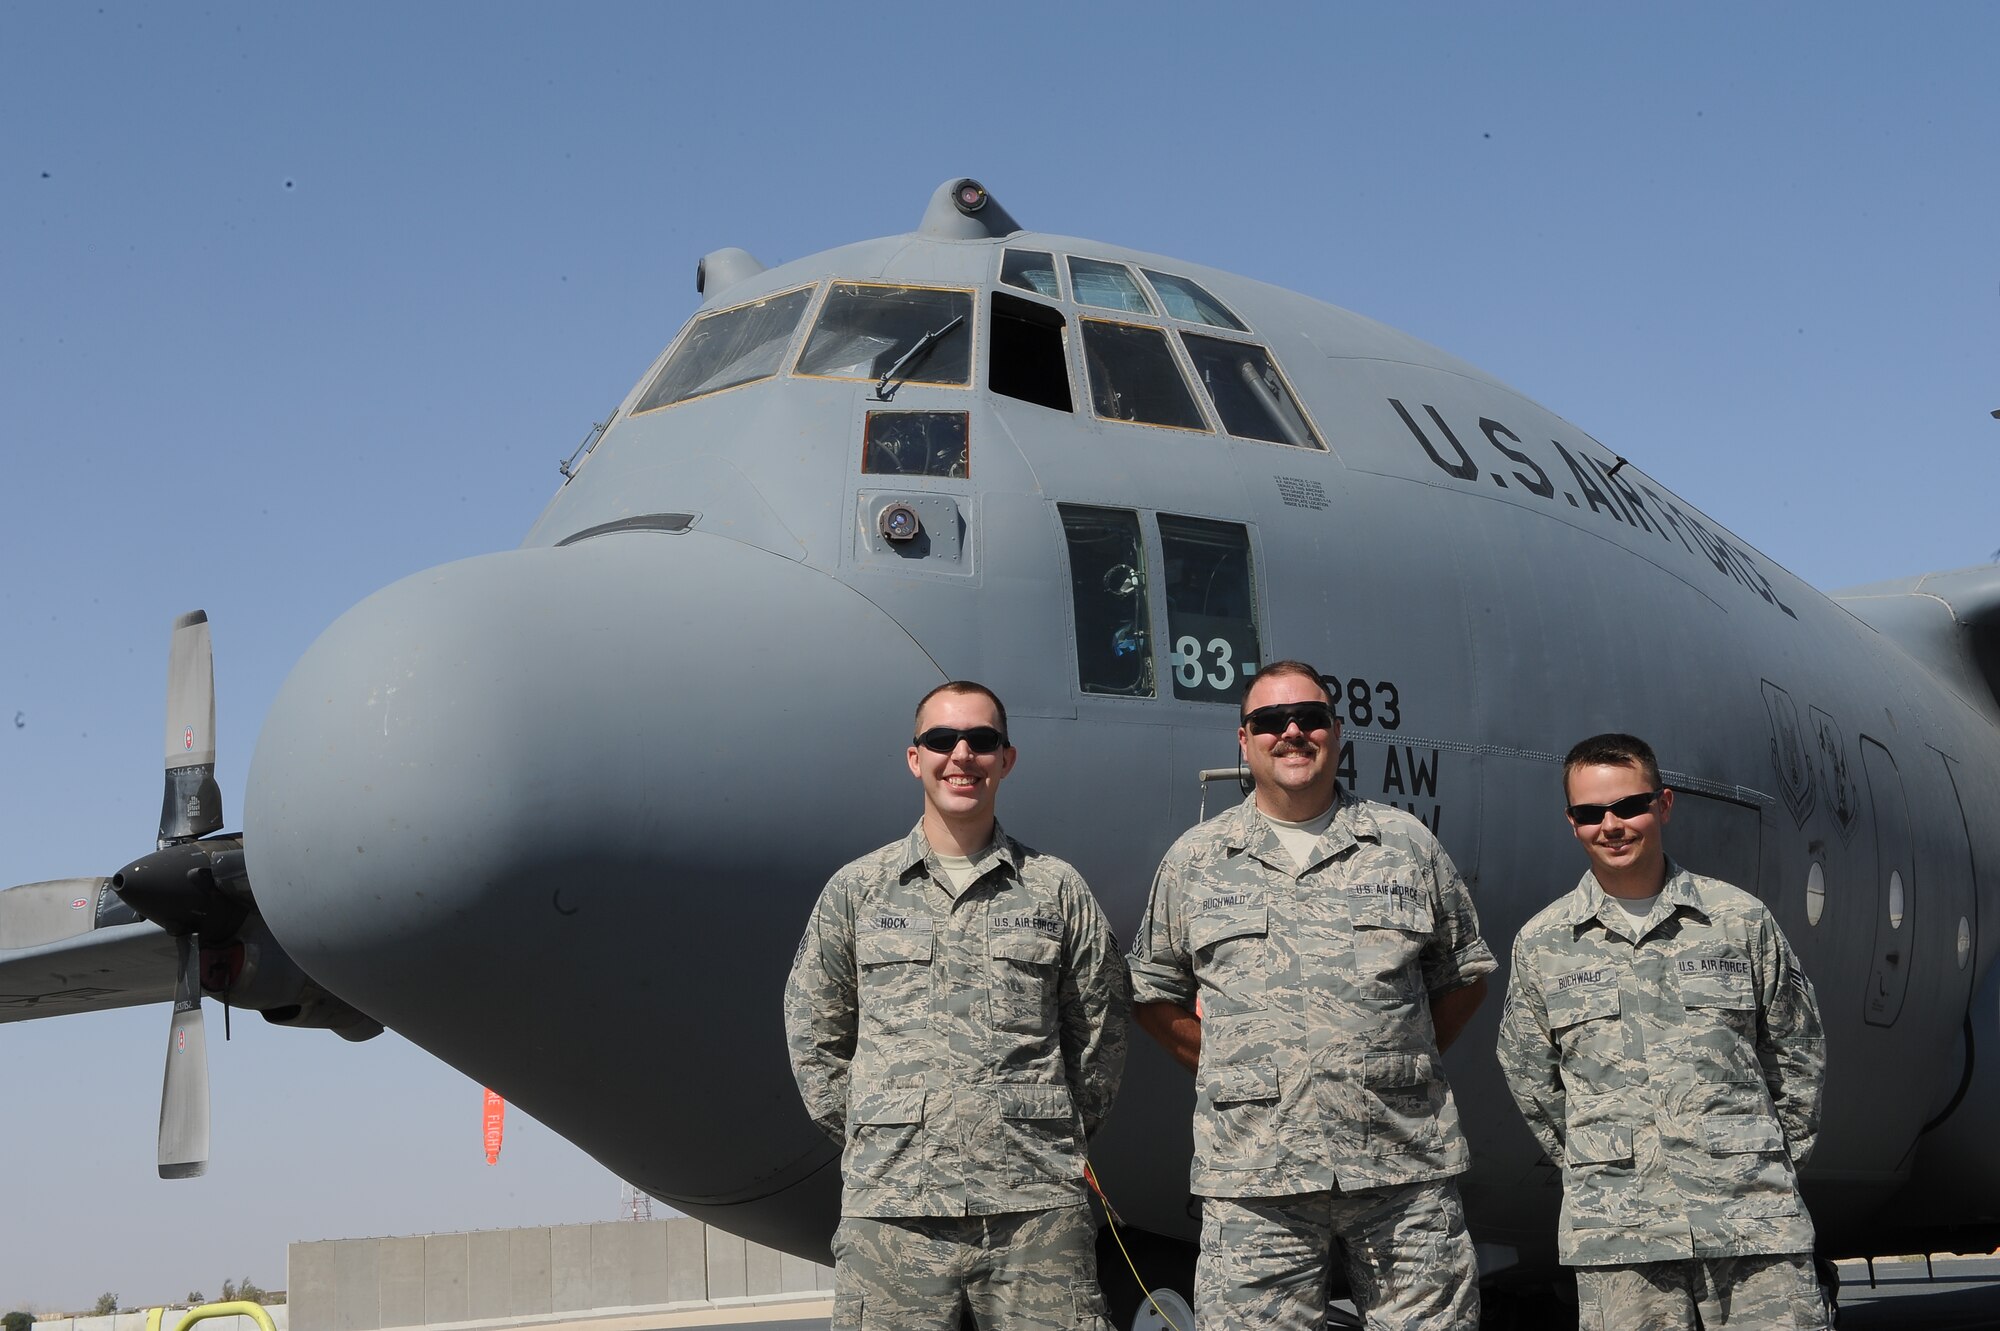 Senior Master Sgt. Steven Buchwald is flanked by his son-in-law Senior Airman Hans Hock on his right and his son, Senior Airman Travis Buchwald, on his left as they stand proudly in front of a C-130 from their home unit, the 107th Airlift Wing, Air National Guard, Niagara Falls, N.Y. The trio are deployed together to the 386th Expeditionary Maintenance Group, undisclosed location, Southwest Asia.  The senior Buchwald retires in December after 32 years of military service and is thankful that he got to share it with family.   “It’s neat to be here with the two boys,” he said.  The Buchwalds are natives of Lockport, N.Y.  Hock is a native is Buffalo, N.Y.  (U.S. Air Force photo by Master Sgt. Marelise Wood)